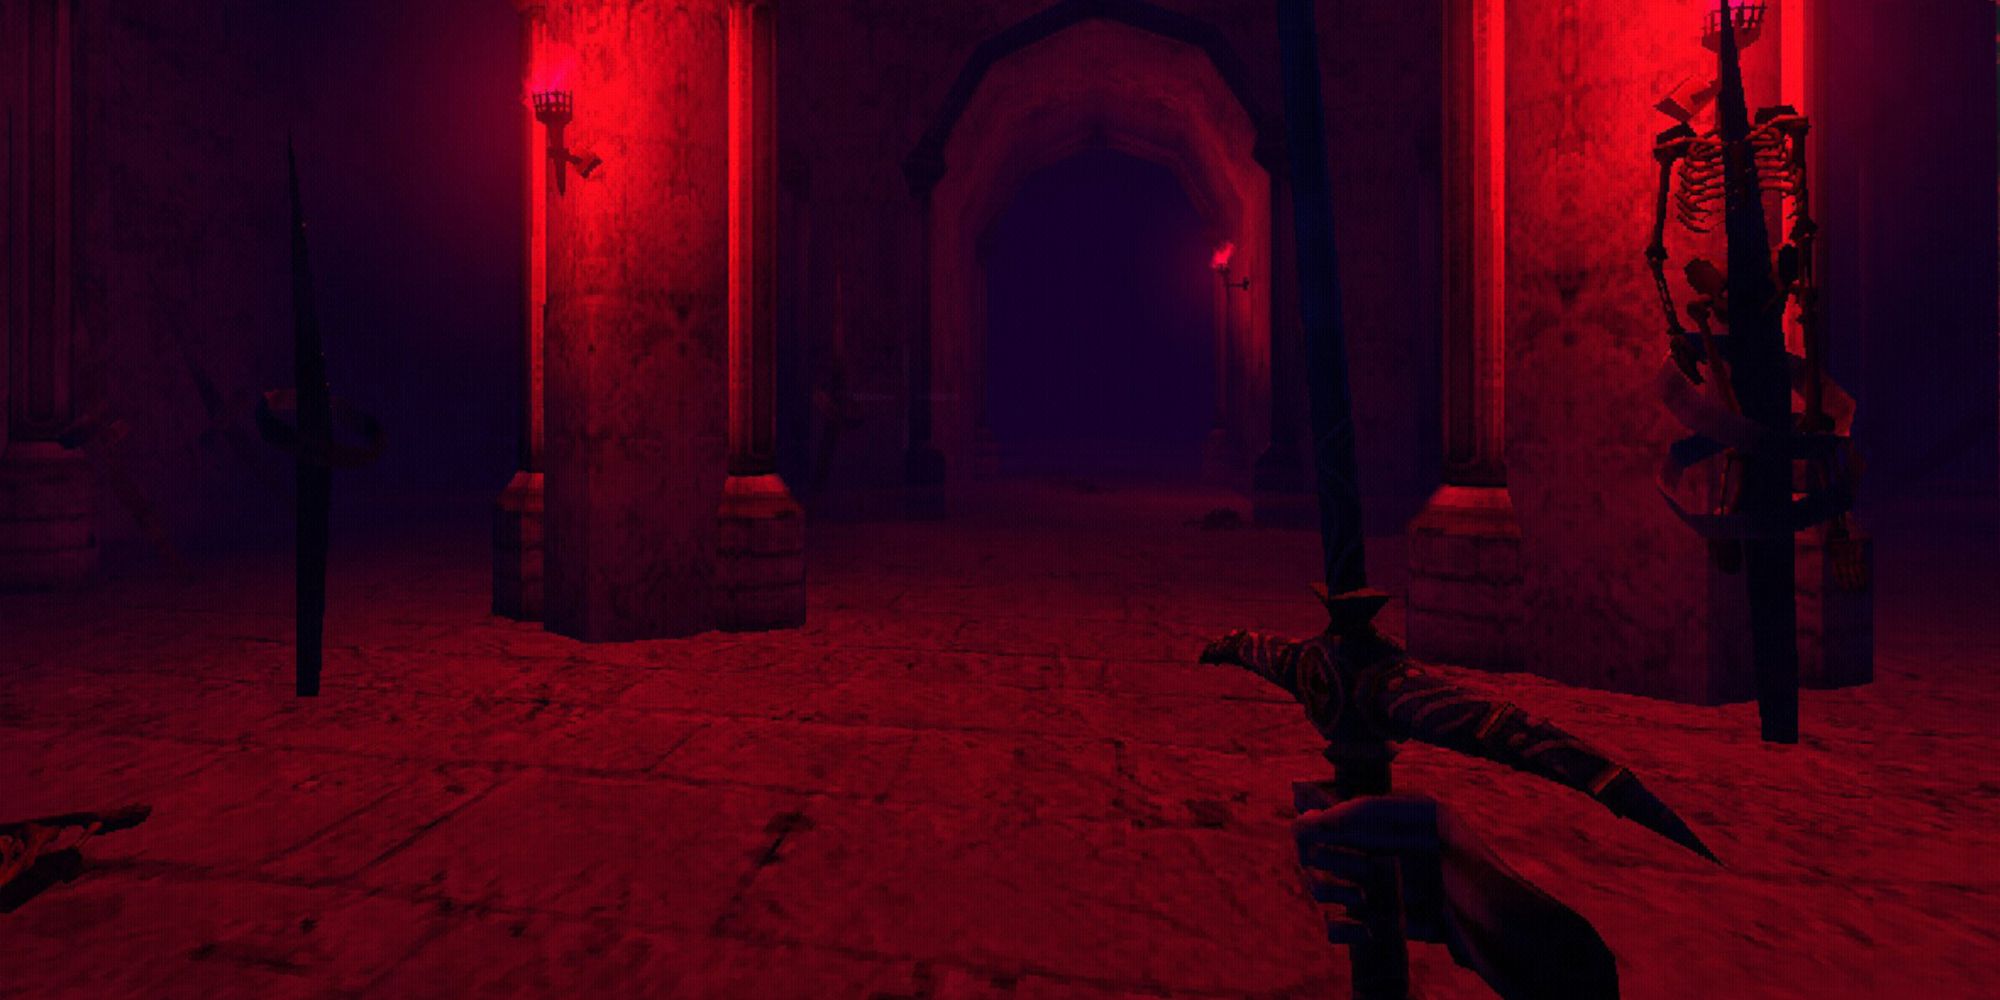 Lunacid, Exploring the a dungeon soaked in red light